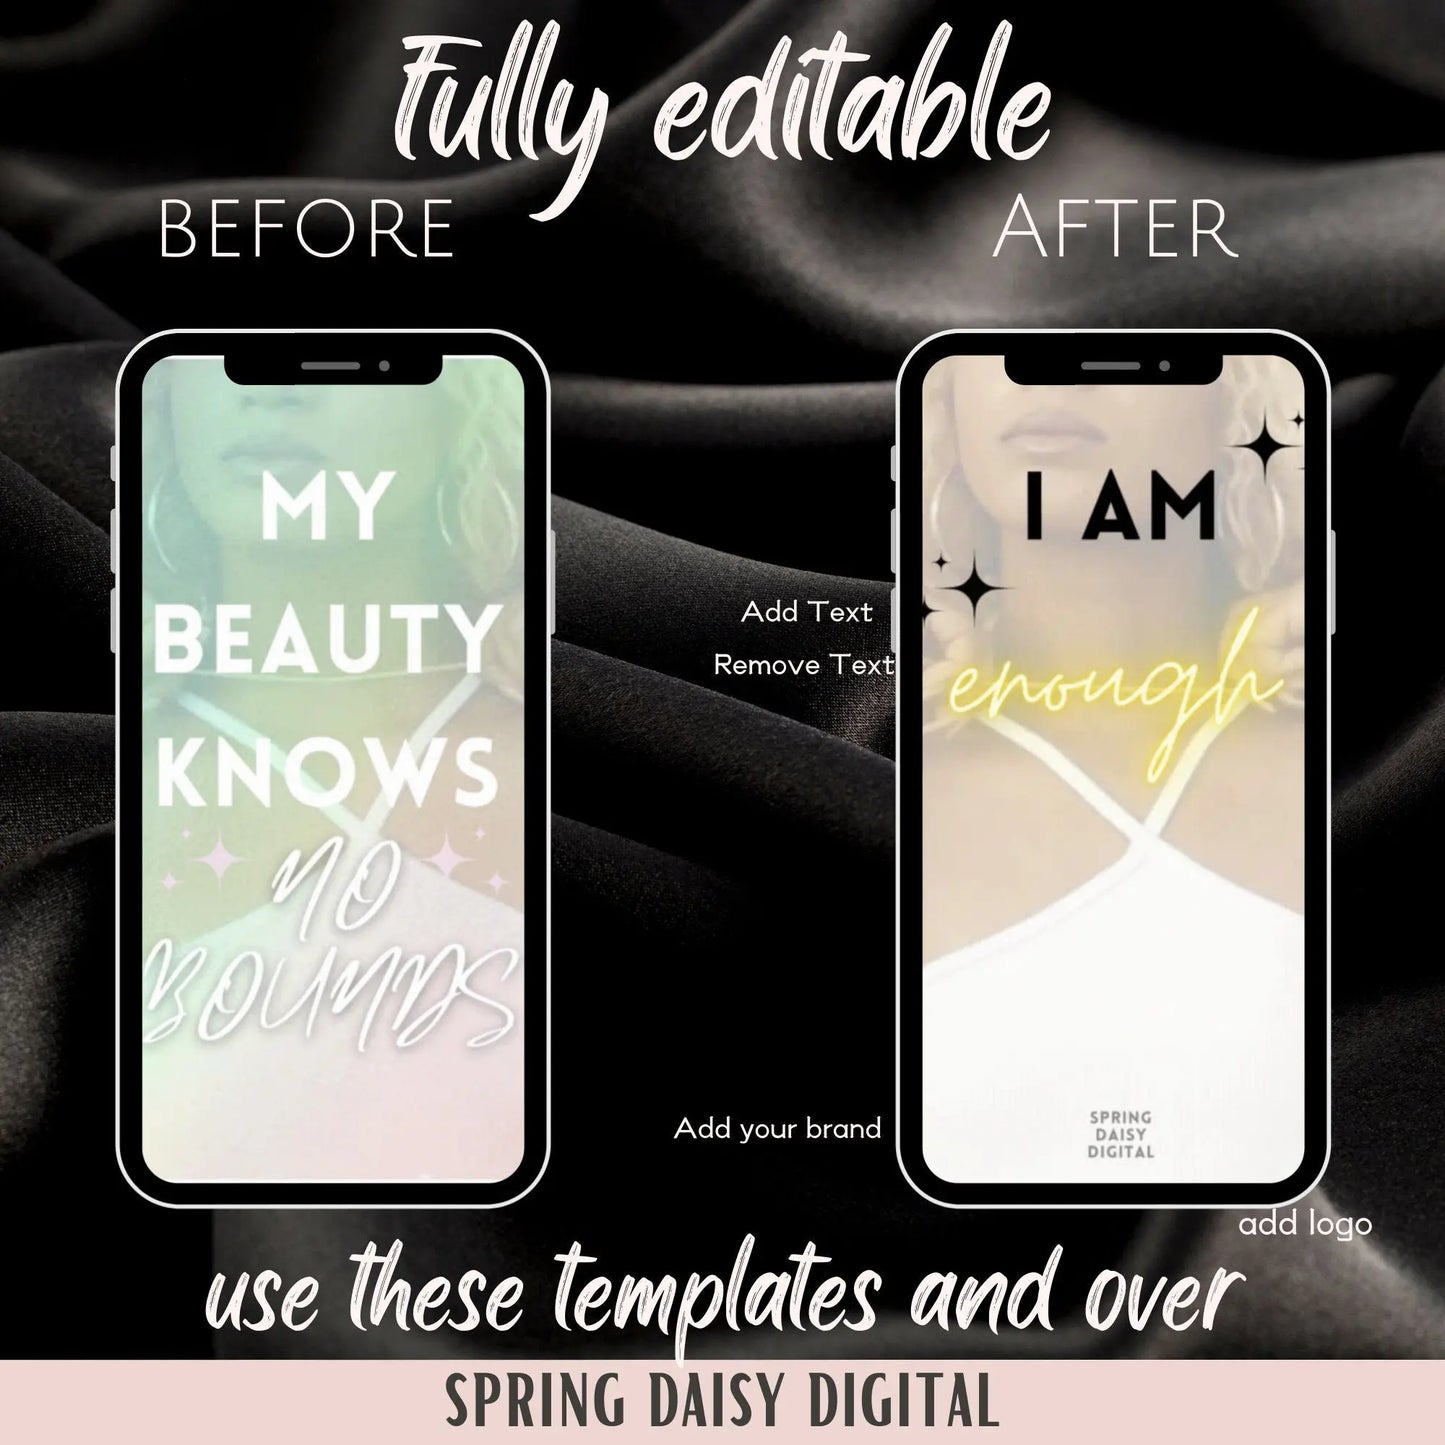 Black Affirmation Reels Motivational Quote Videos Instagram Ready To Post Social Media Canva Editable Template Bundle Soft Girl Content